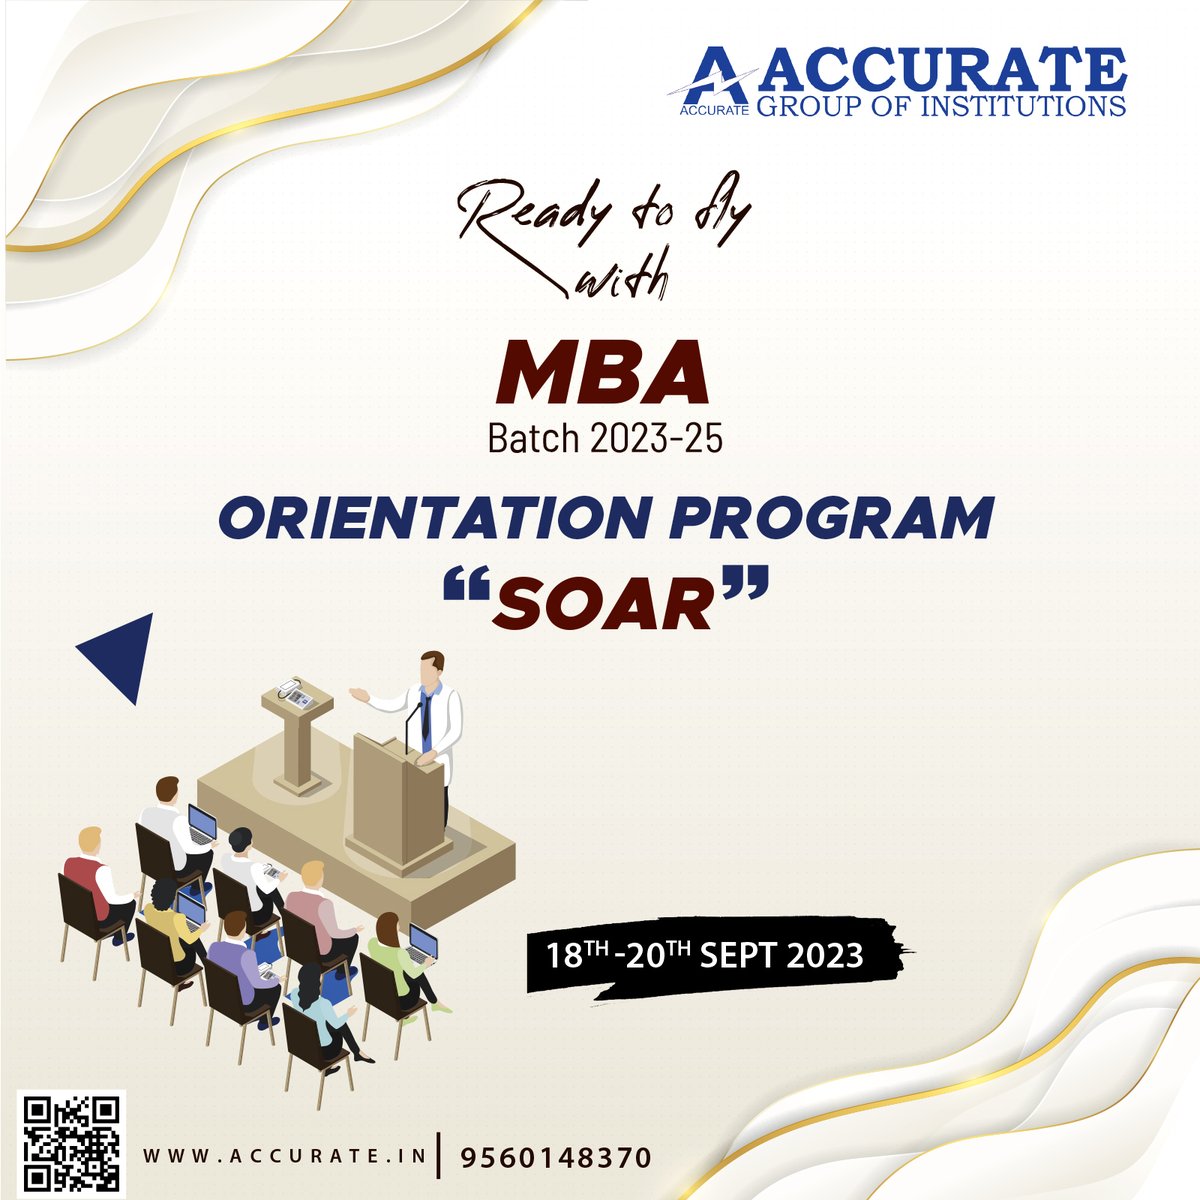 Attention MBA Batch 2023-2025! 📣 

Get ready to spread your wings and take flight because our Orientation Program is just around the corner! 🌟

📅 Mark your calendars: September 18th to 20th, 2023.

#Accurate #MBAOrientation #SOAR2023 #NewBeginnings #MBAJourney #MBA2023